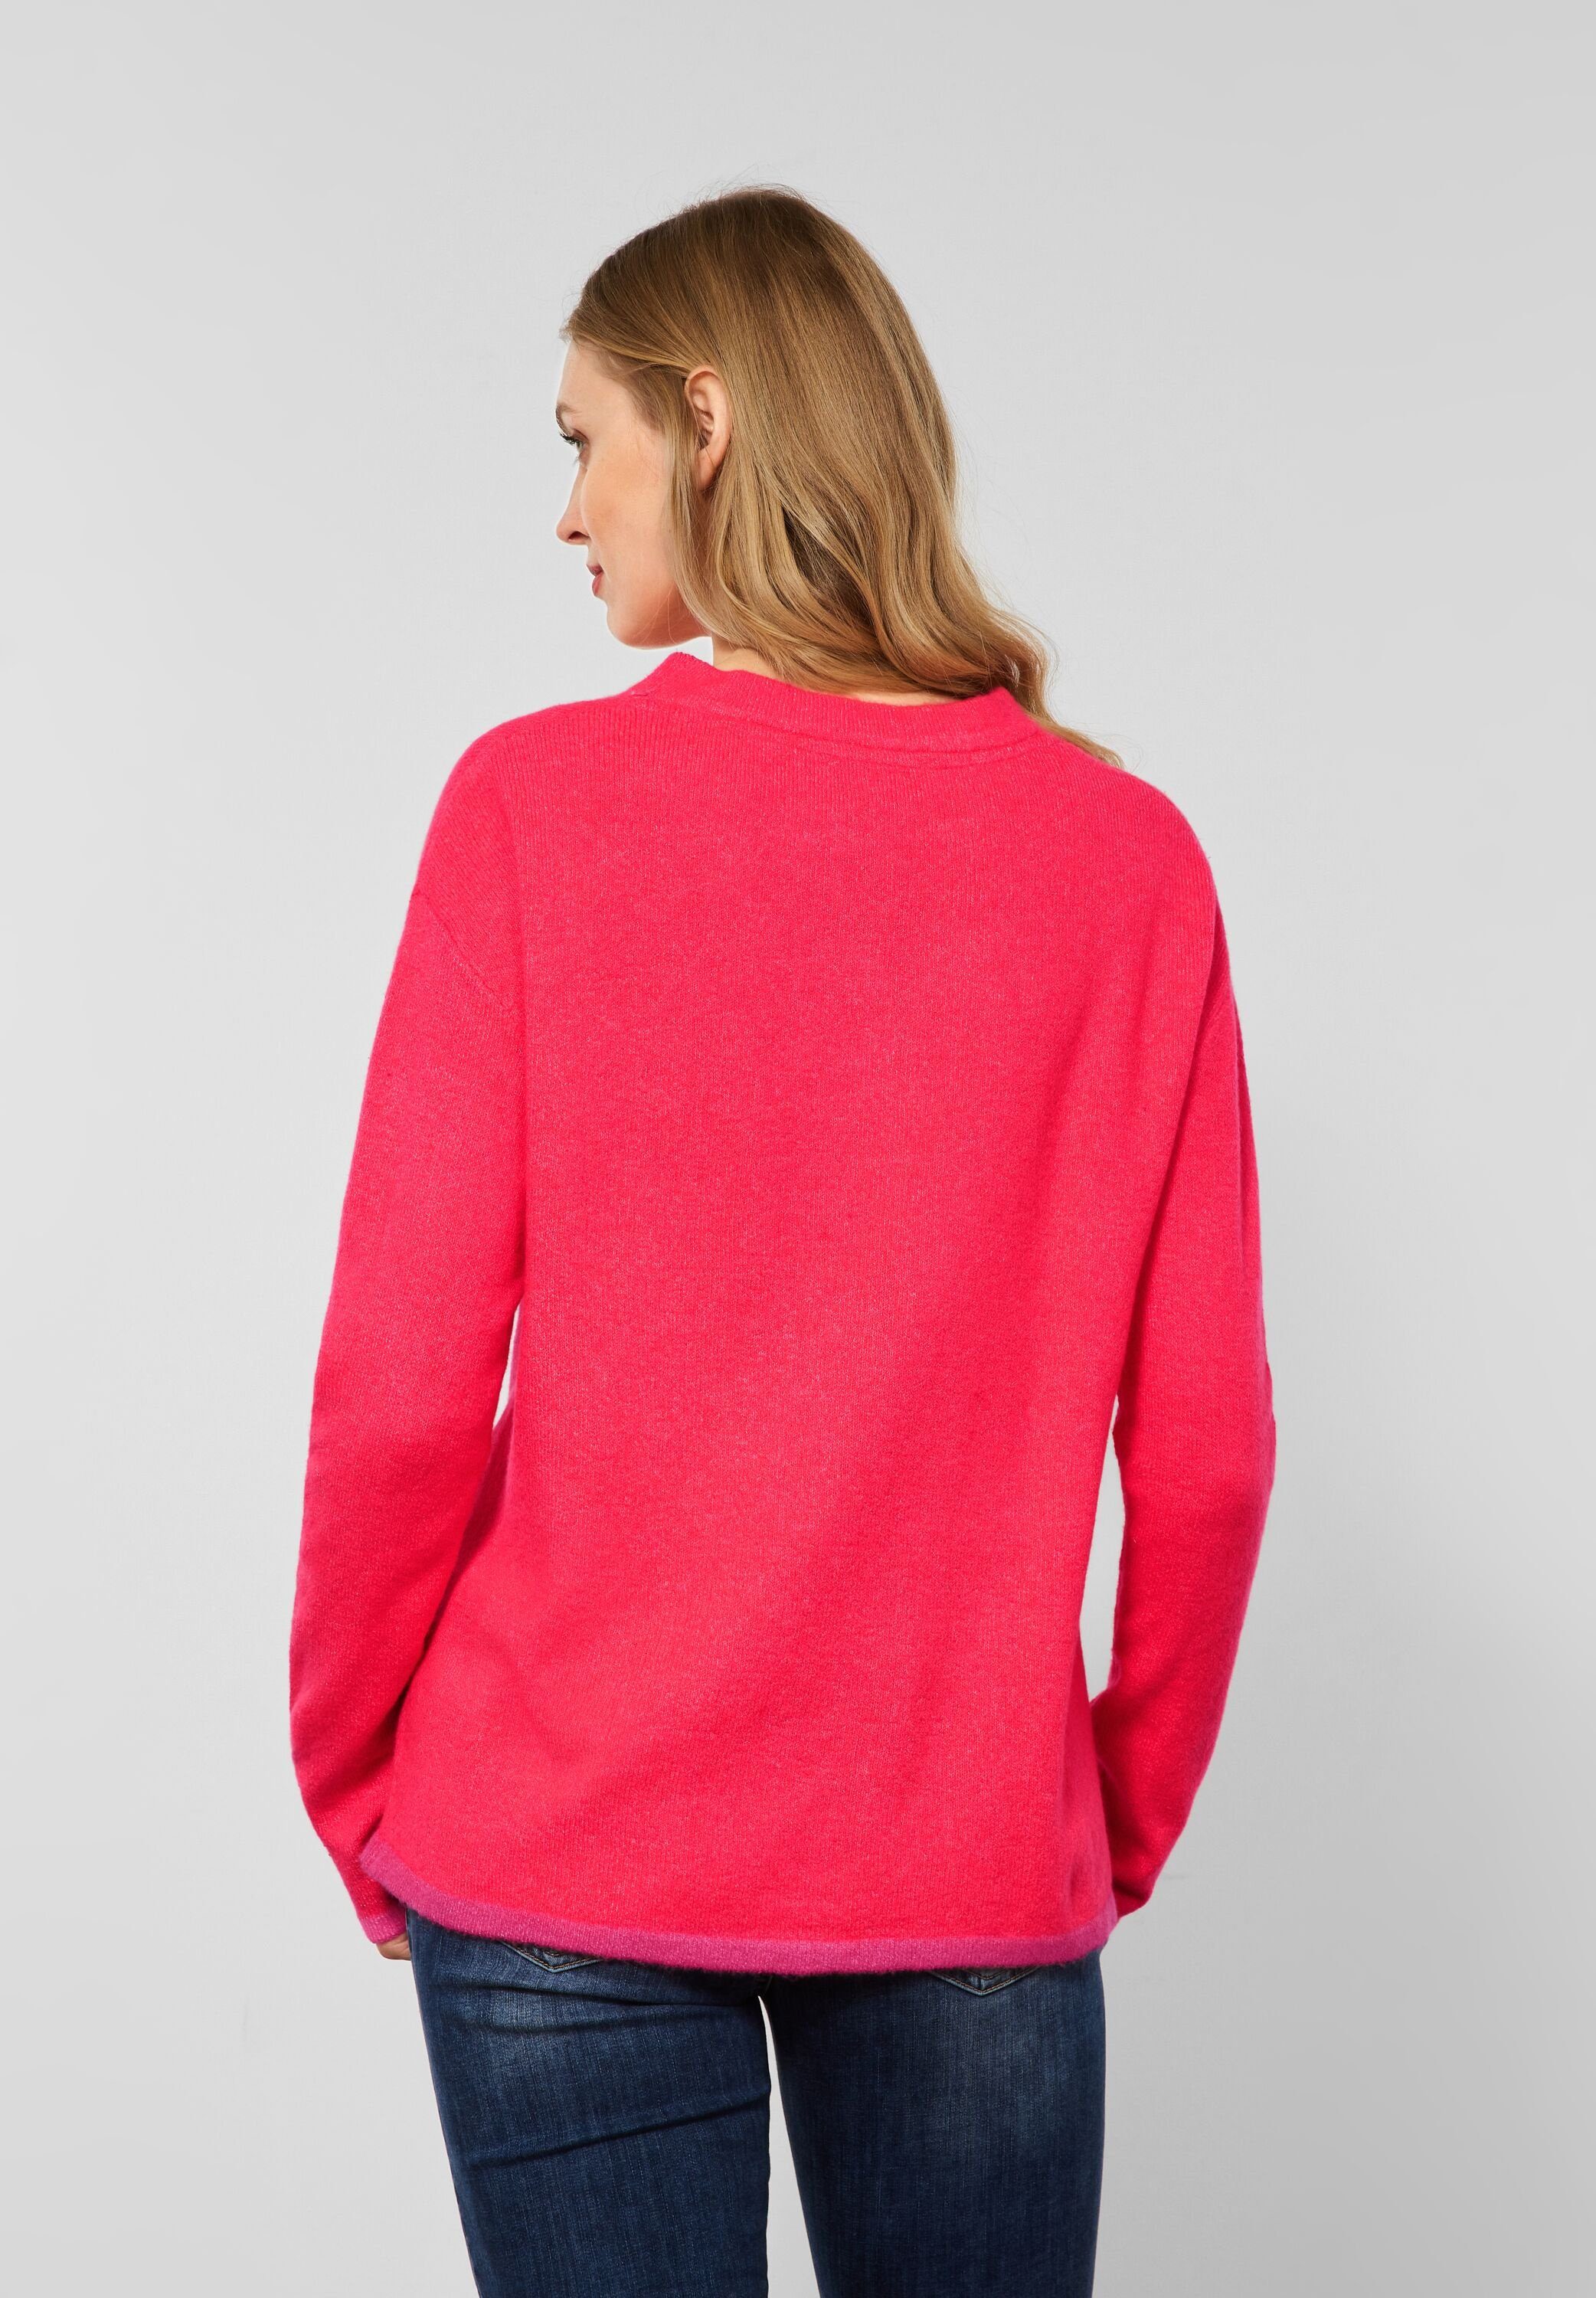 showy mit Strickpullover ONE Pullover coral STREET Farbdetails